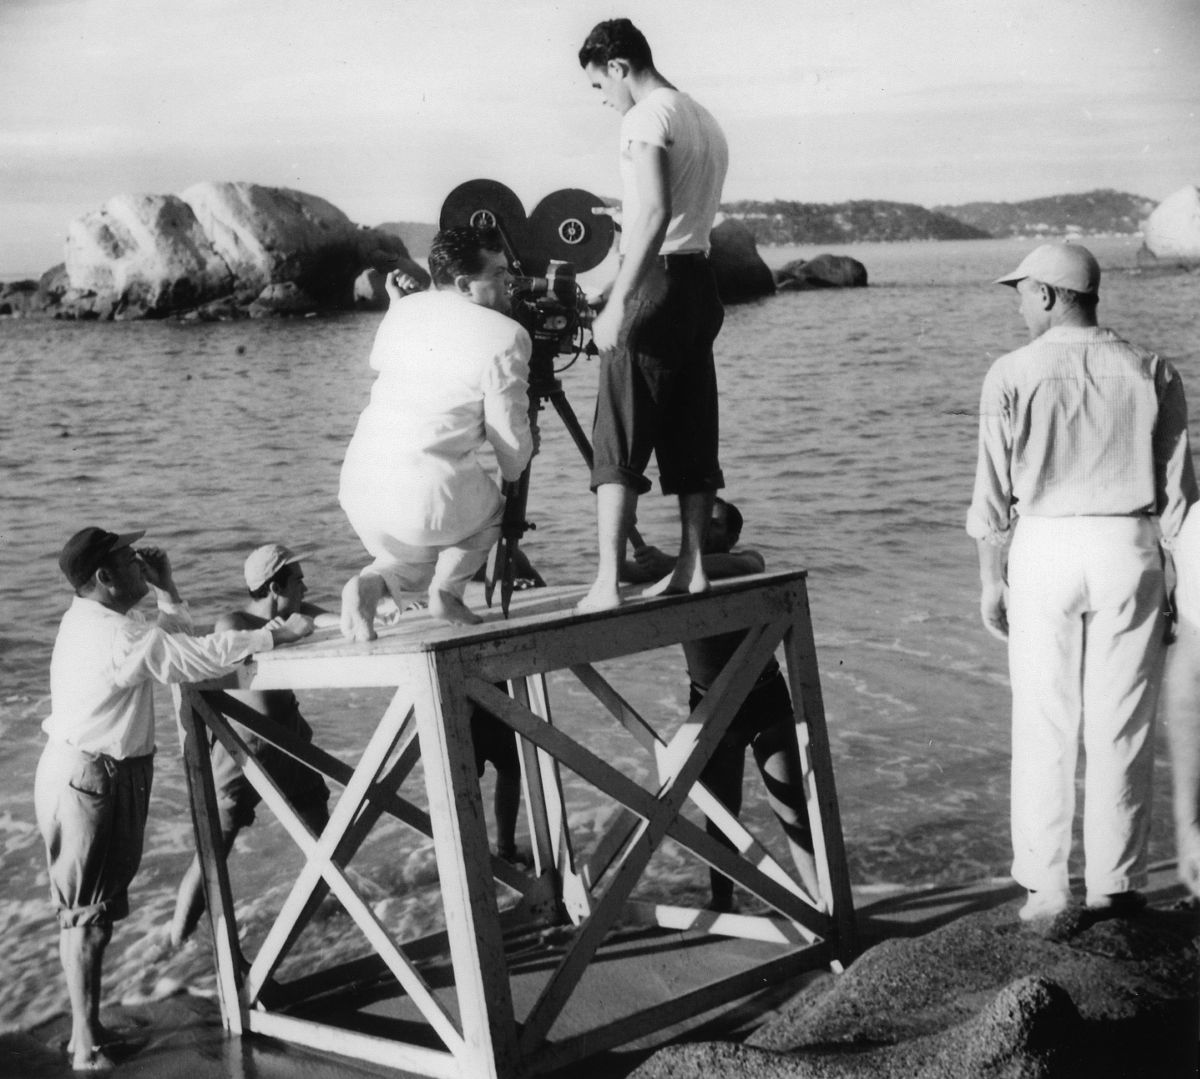 Welles examines the placement of the camera on a platform. At his side is camera assistant Richard H. Kline.